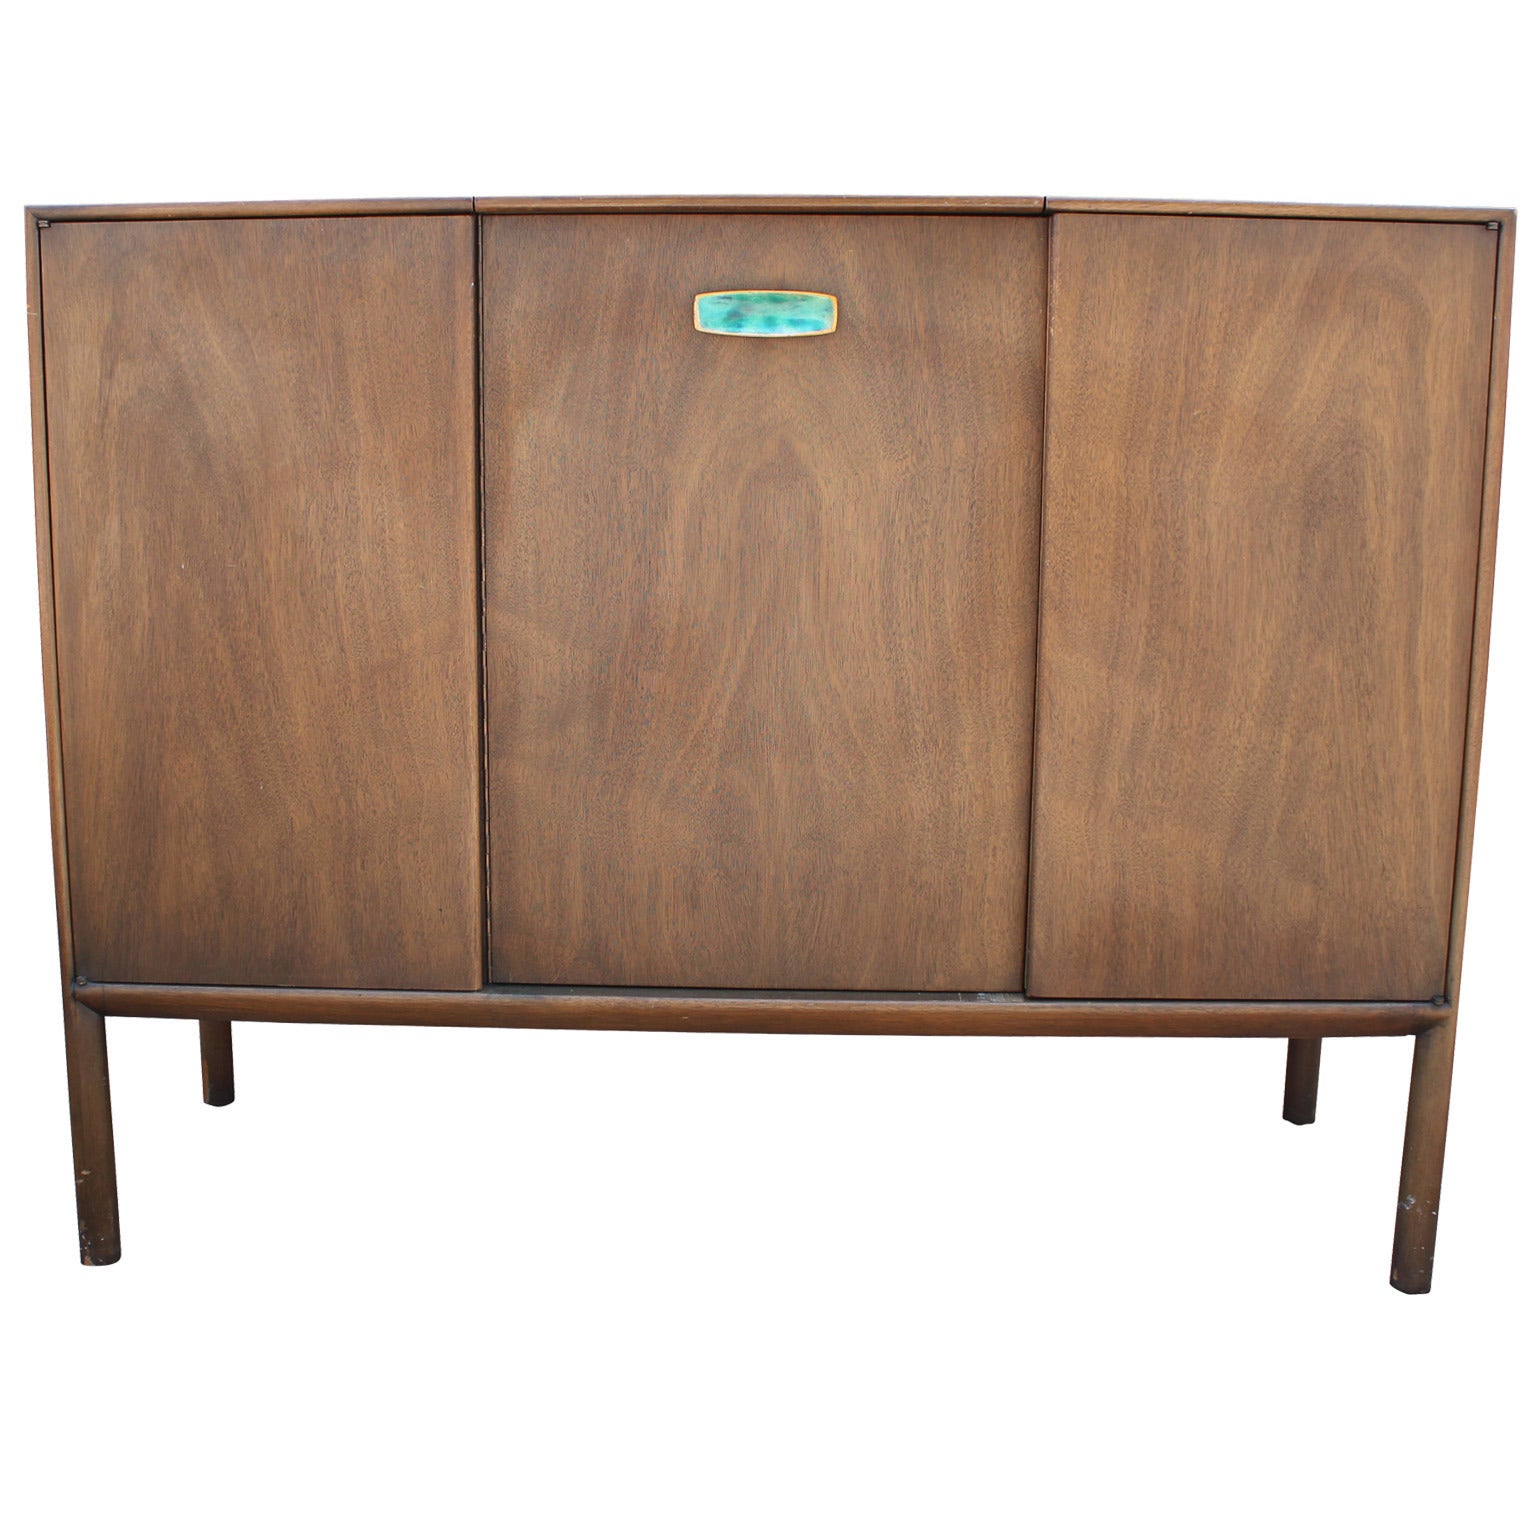 Rare Mid Century Modern Ray Sabota Dresser or Chest for Mount Airy